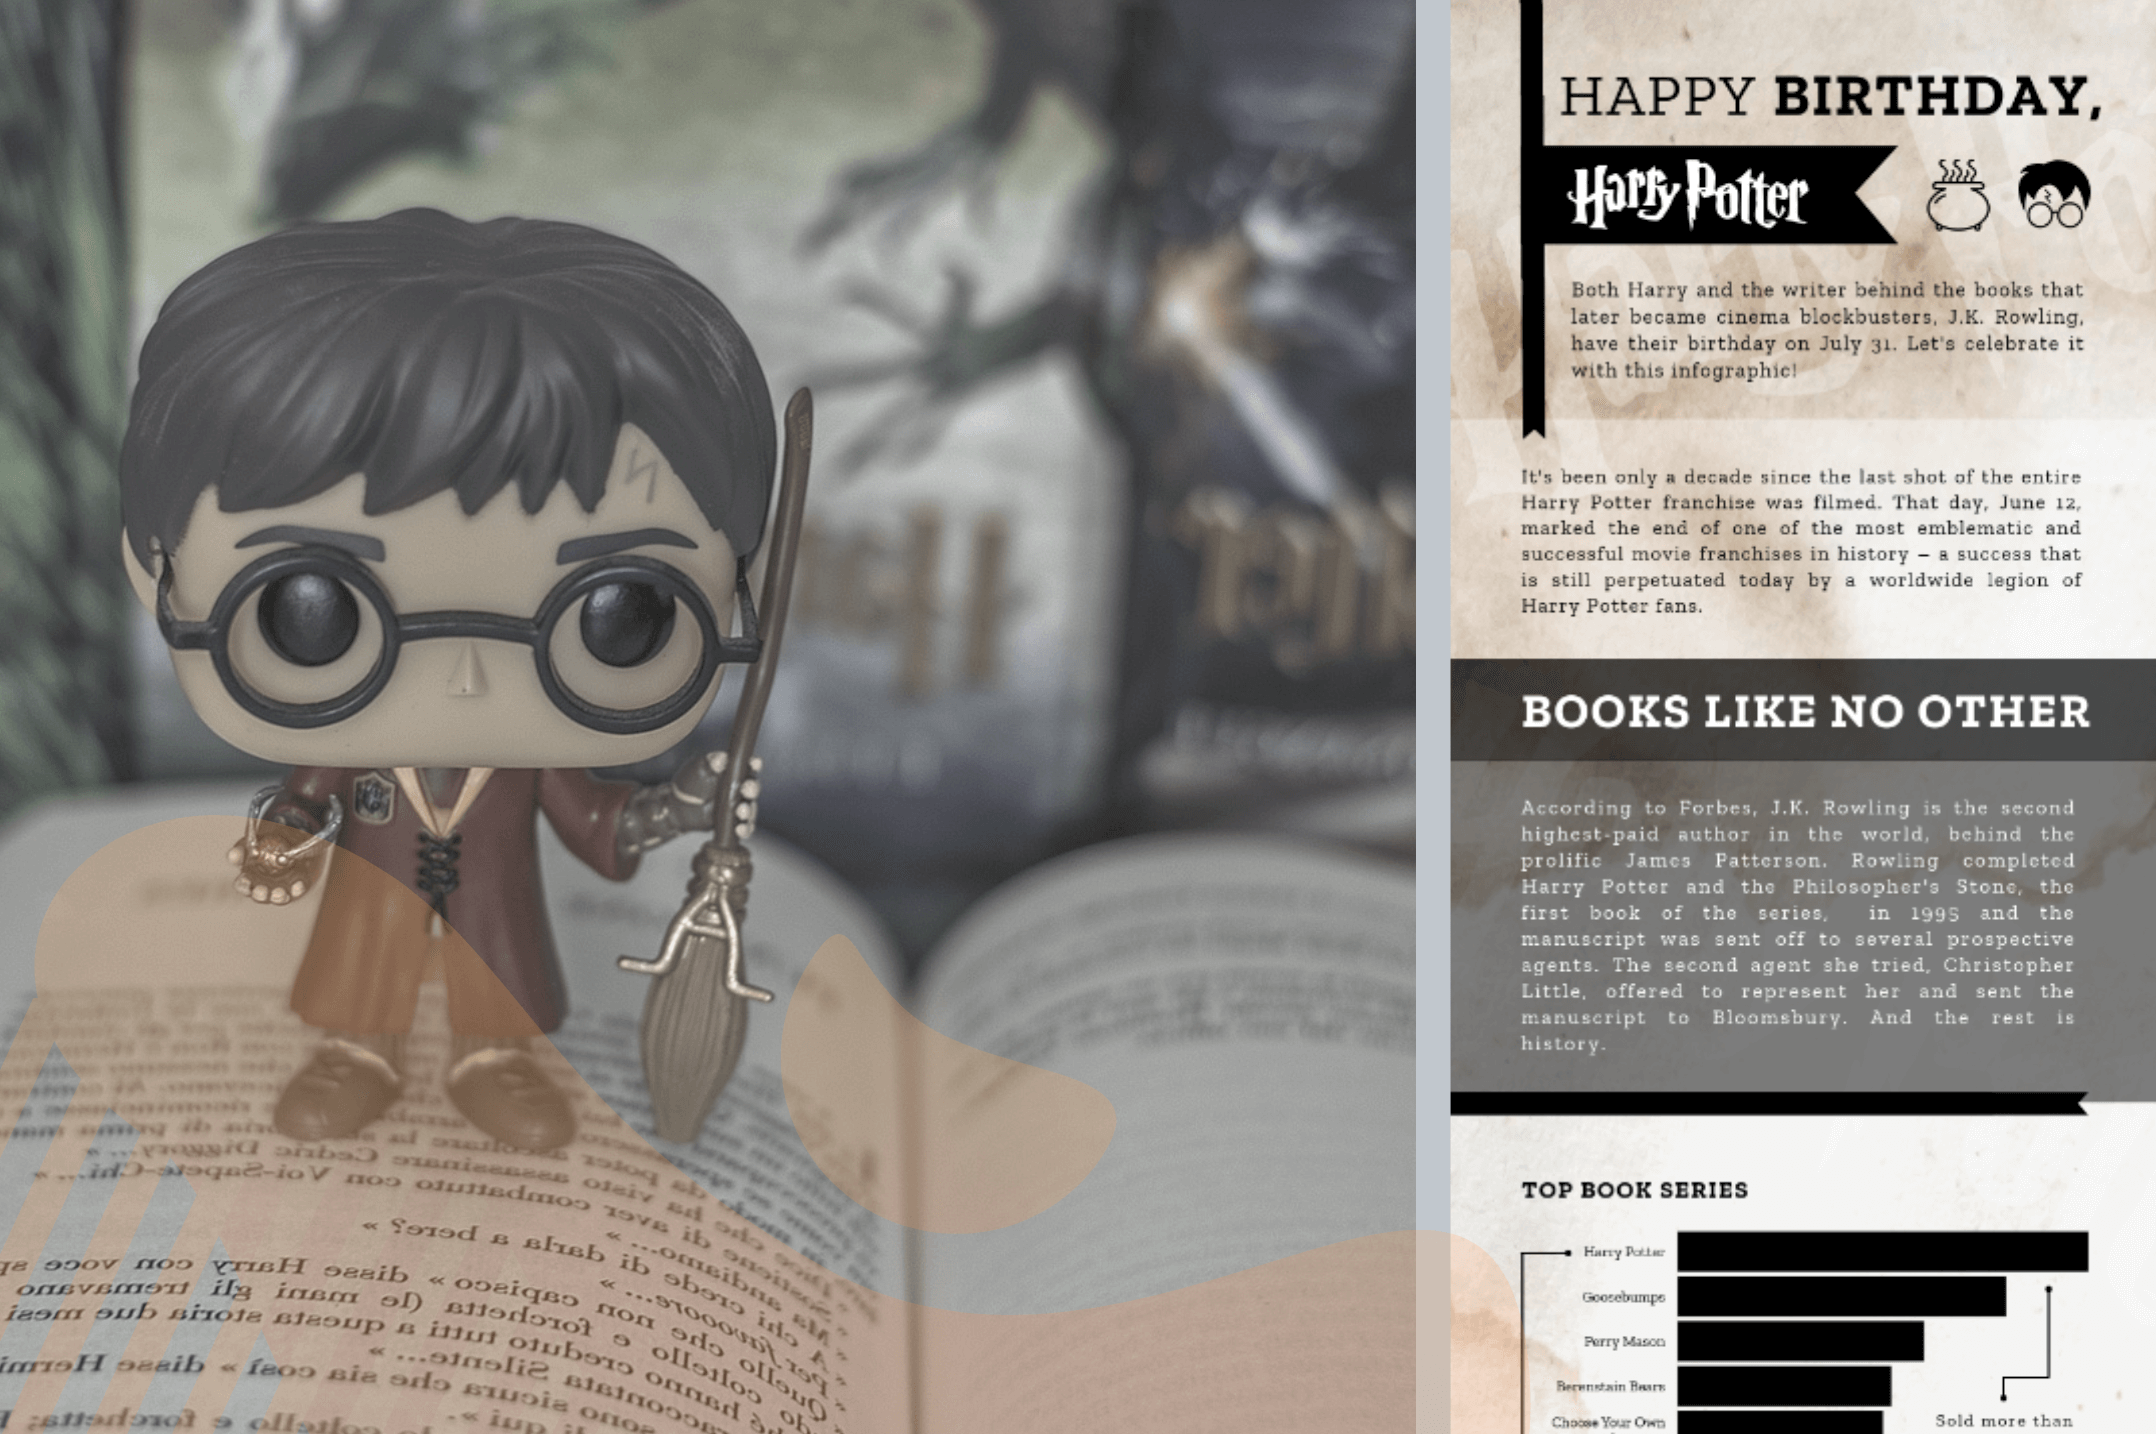 infographic harry potter